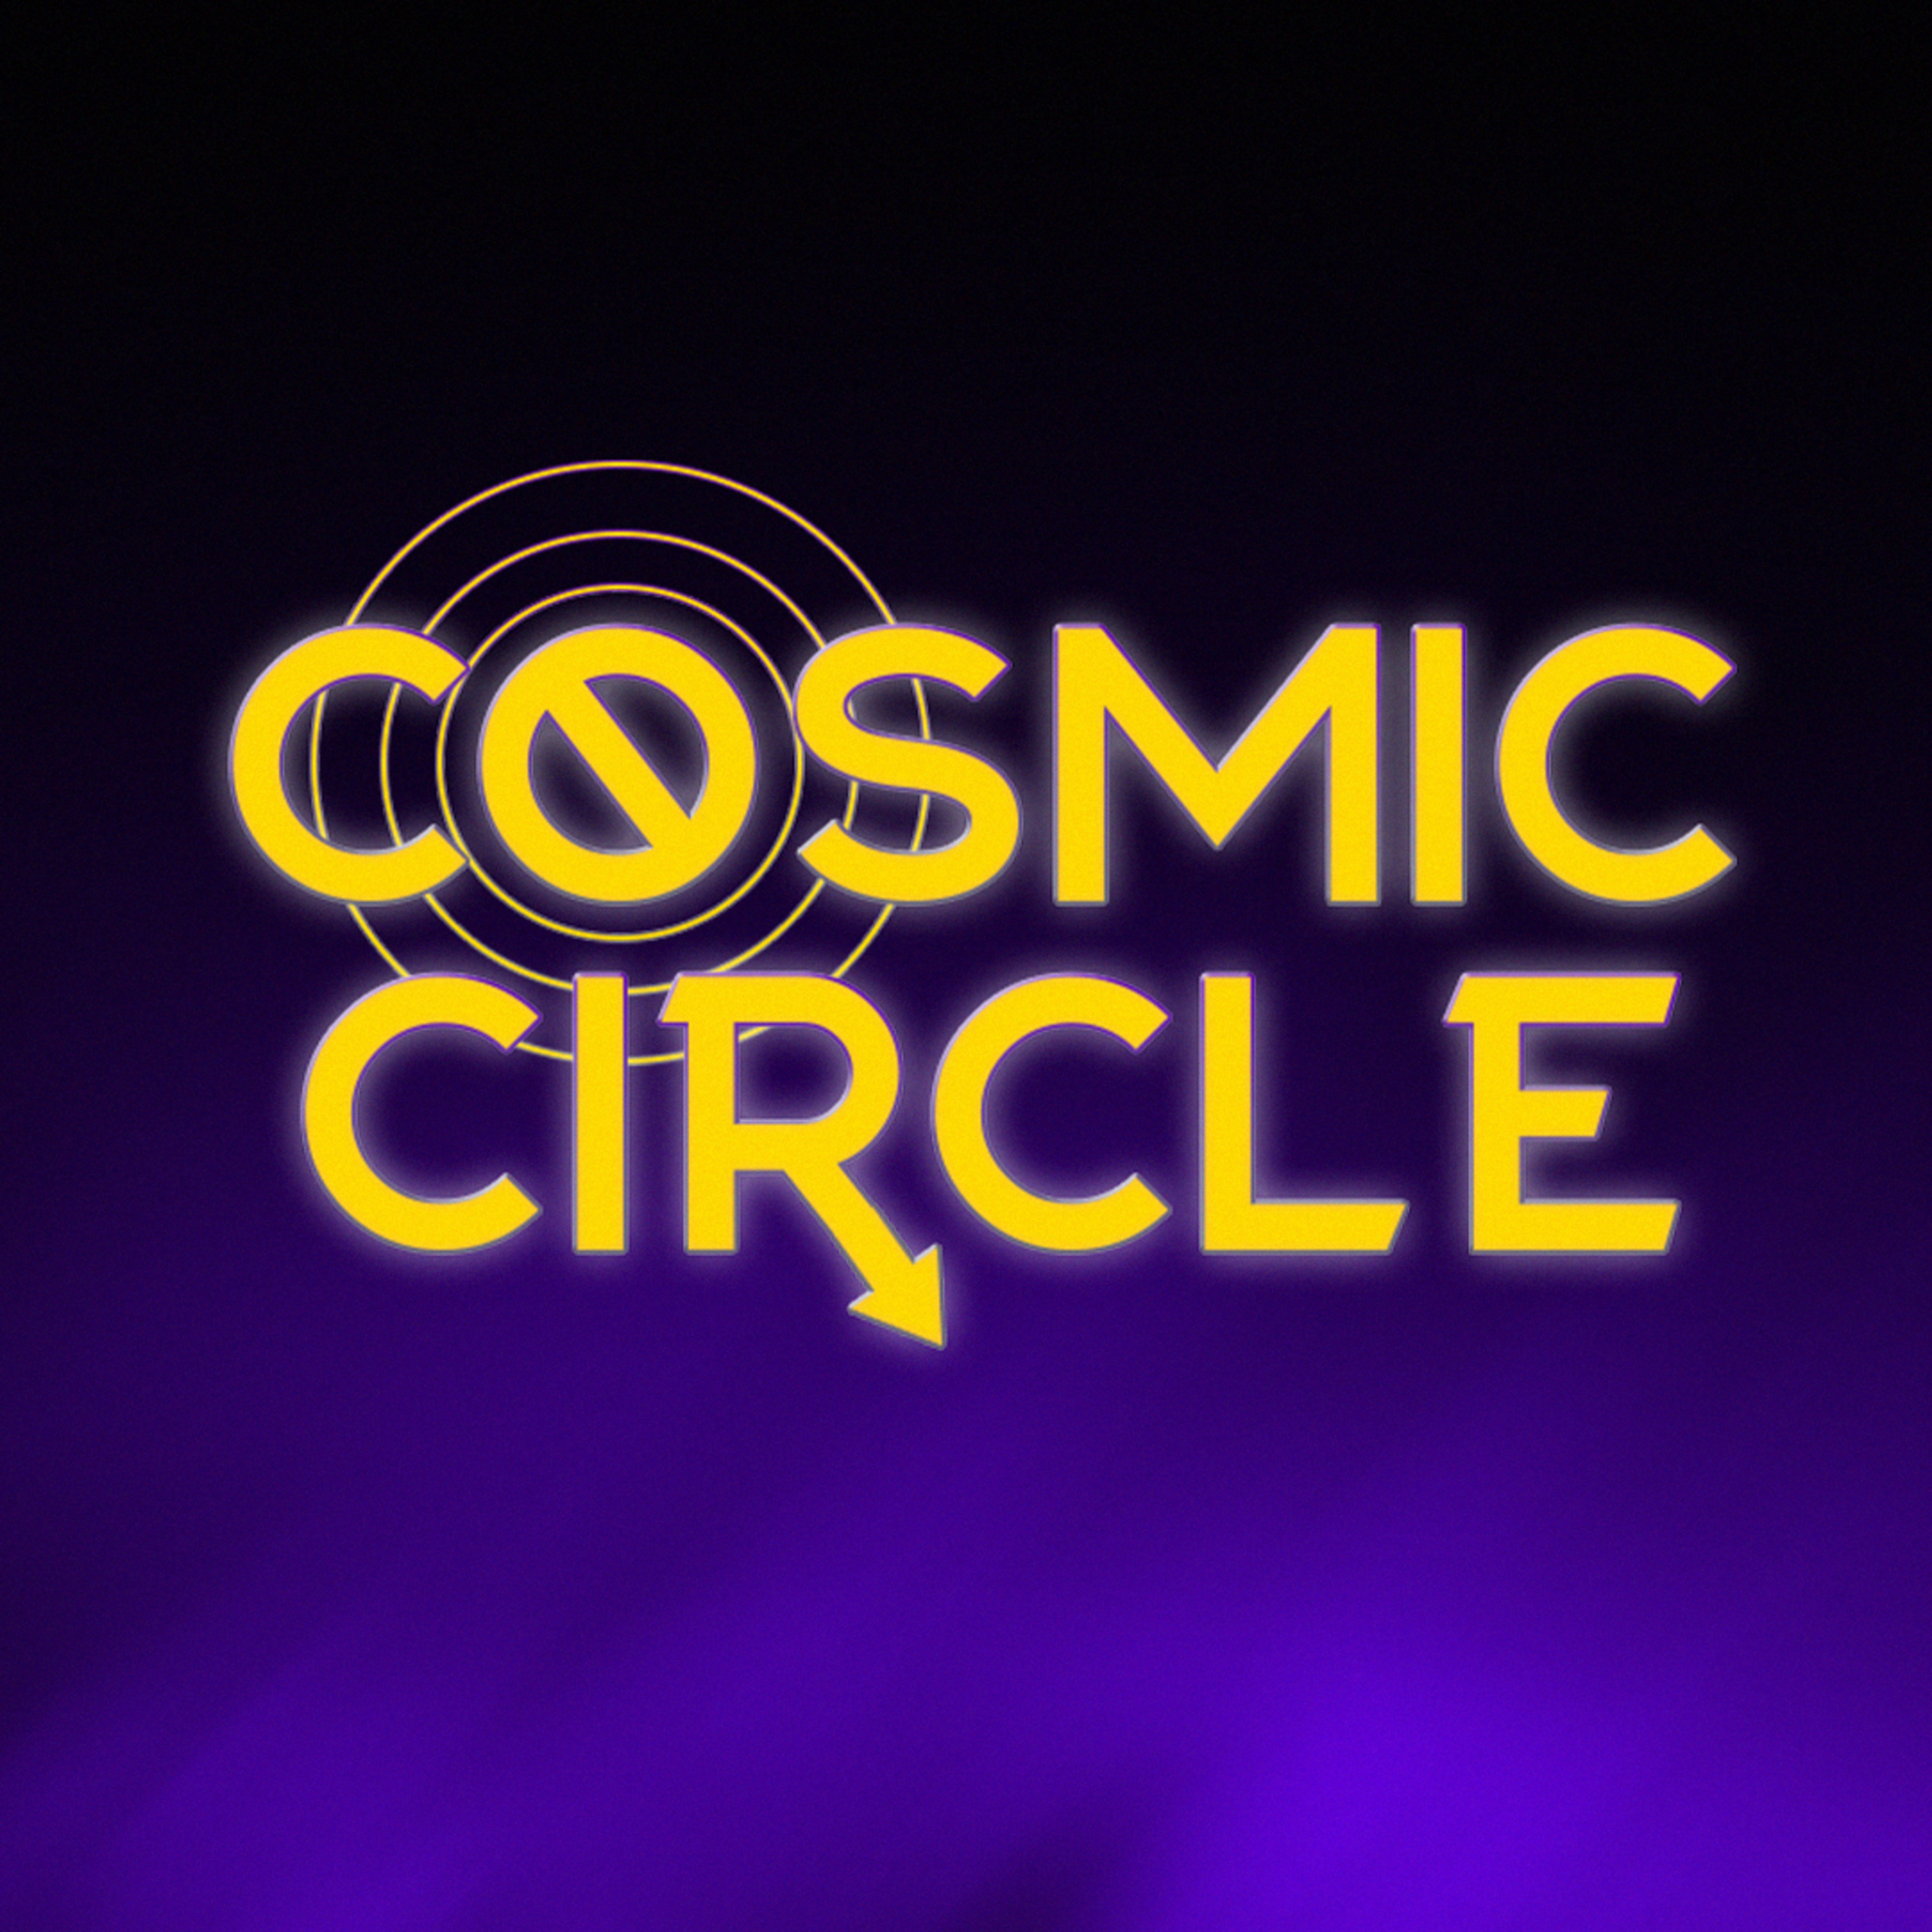 The Cosmic Circle Episode 5: Hawkeye Finale Discussion (SPOILERS!)